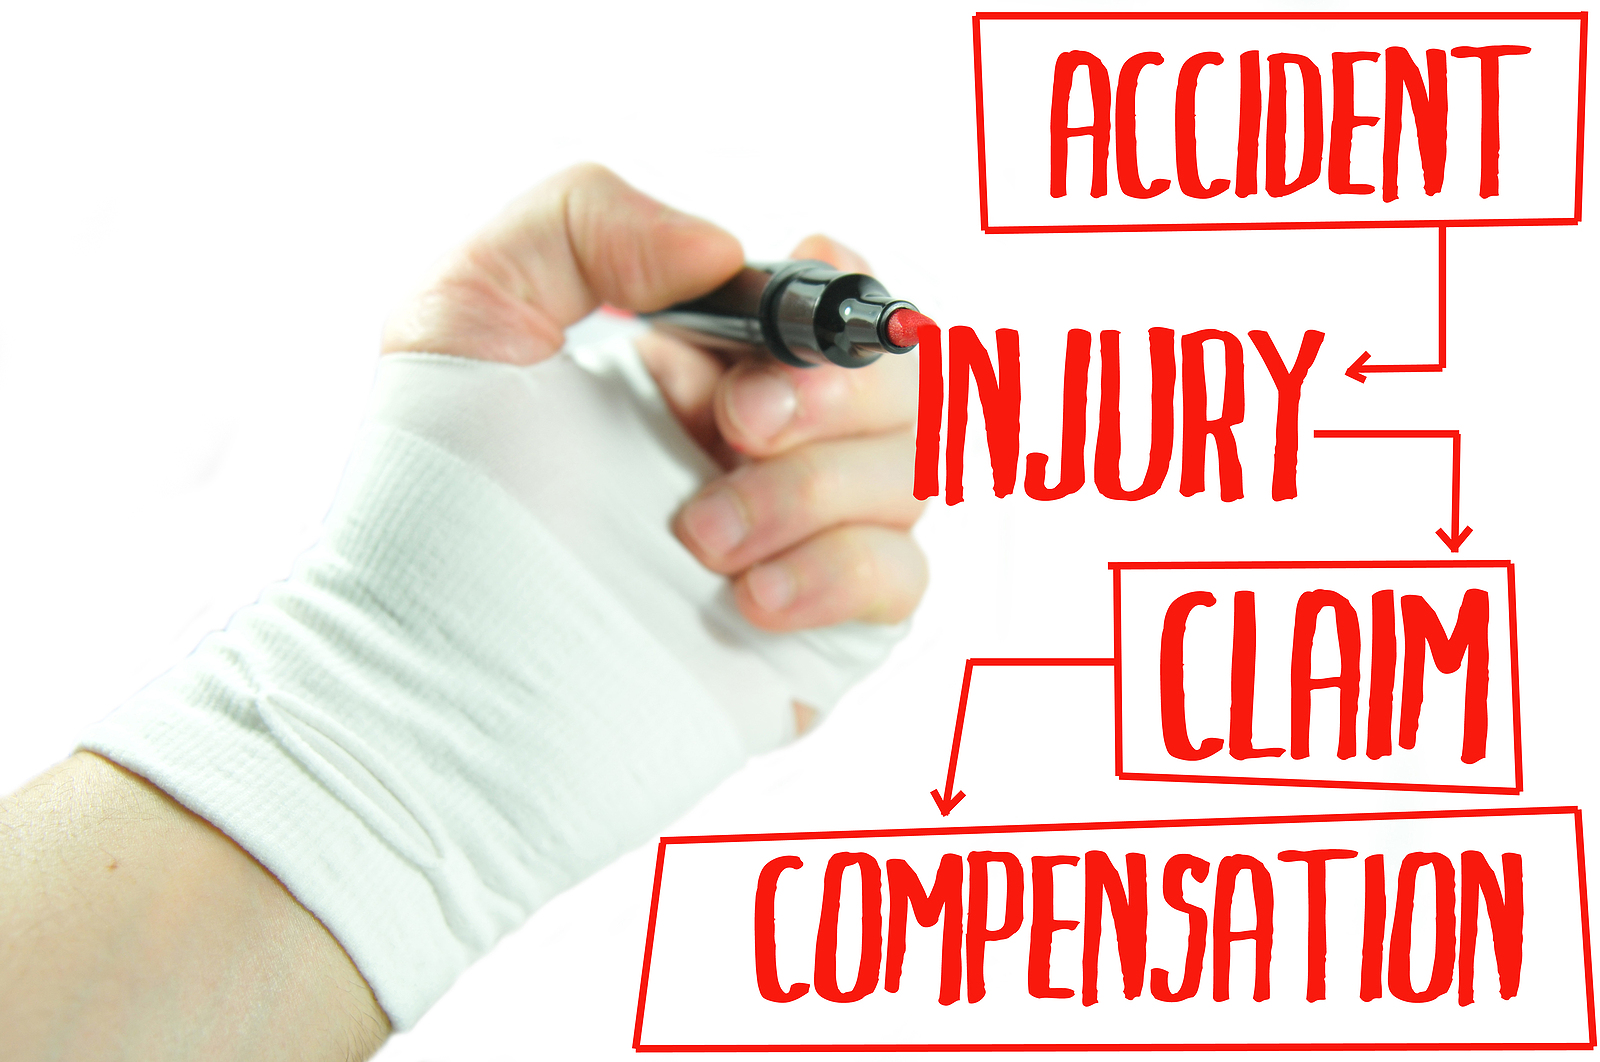 Needing a Workers Compensation Attorney Near Me?